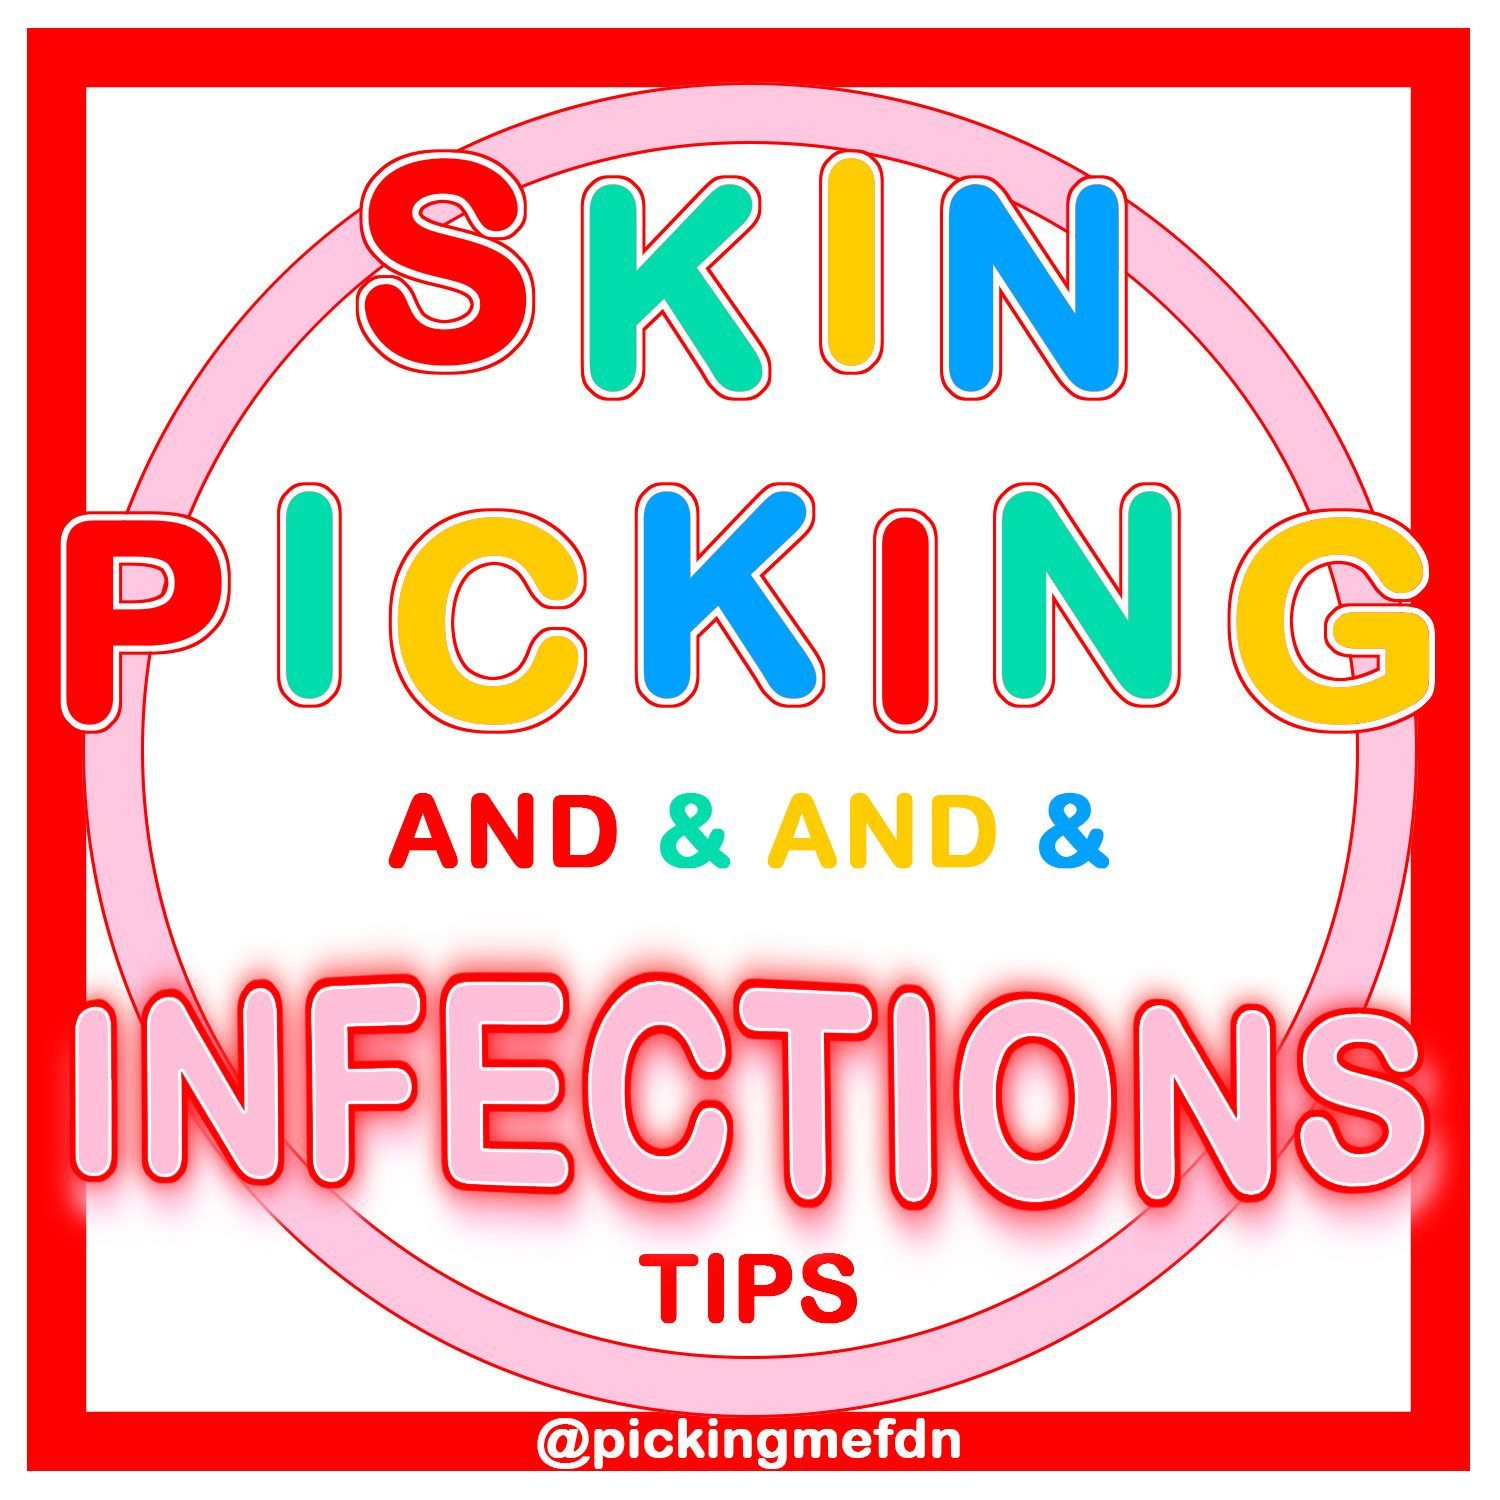 Downloadable Management Tip PDFs: Skin Picking & Infections